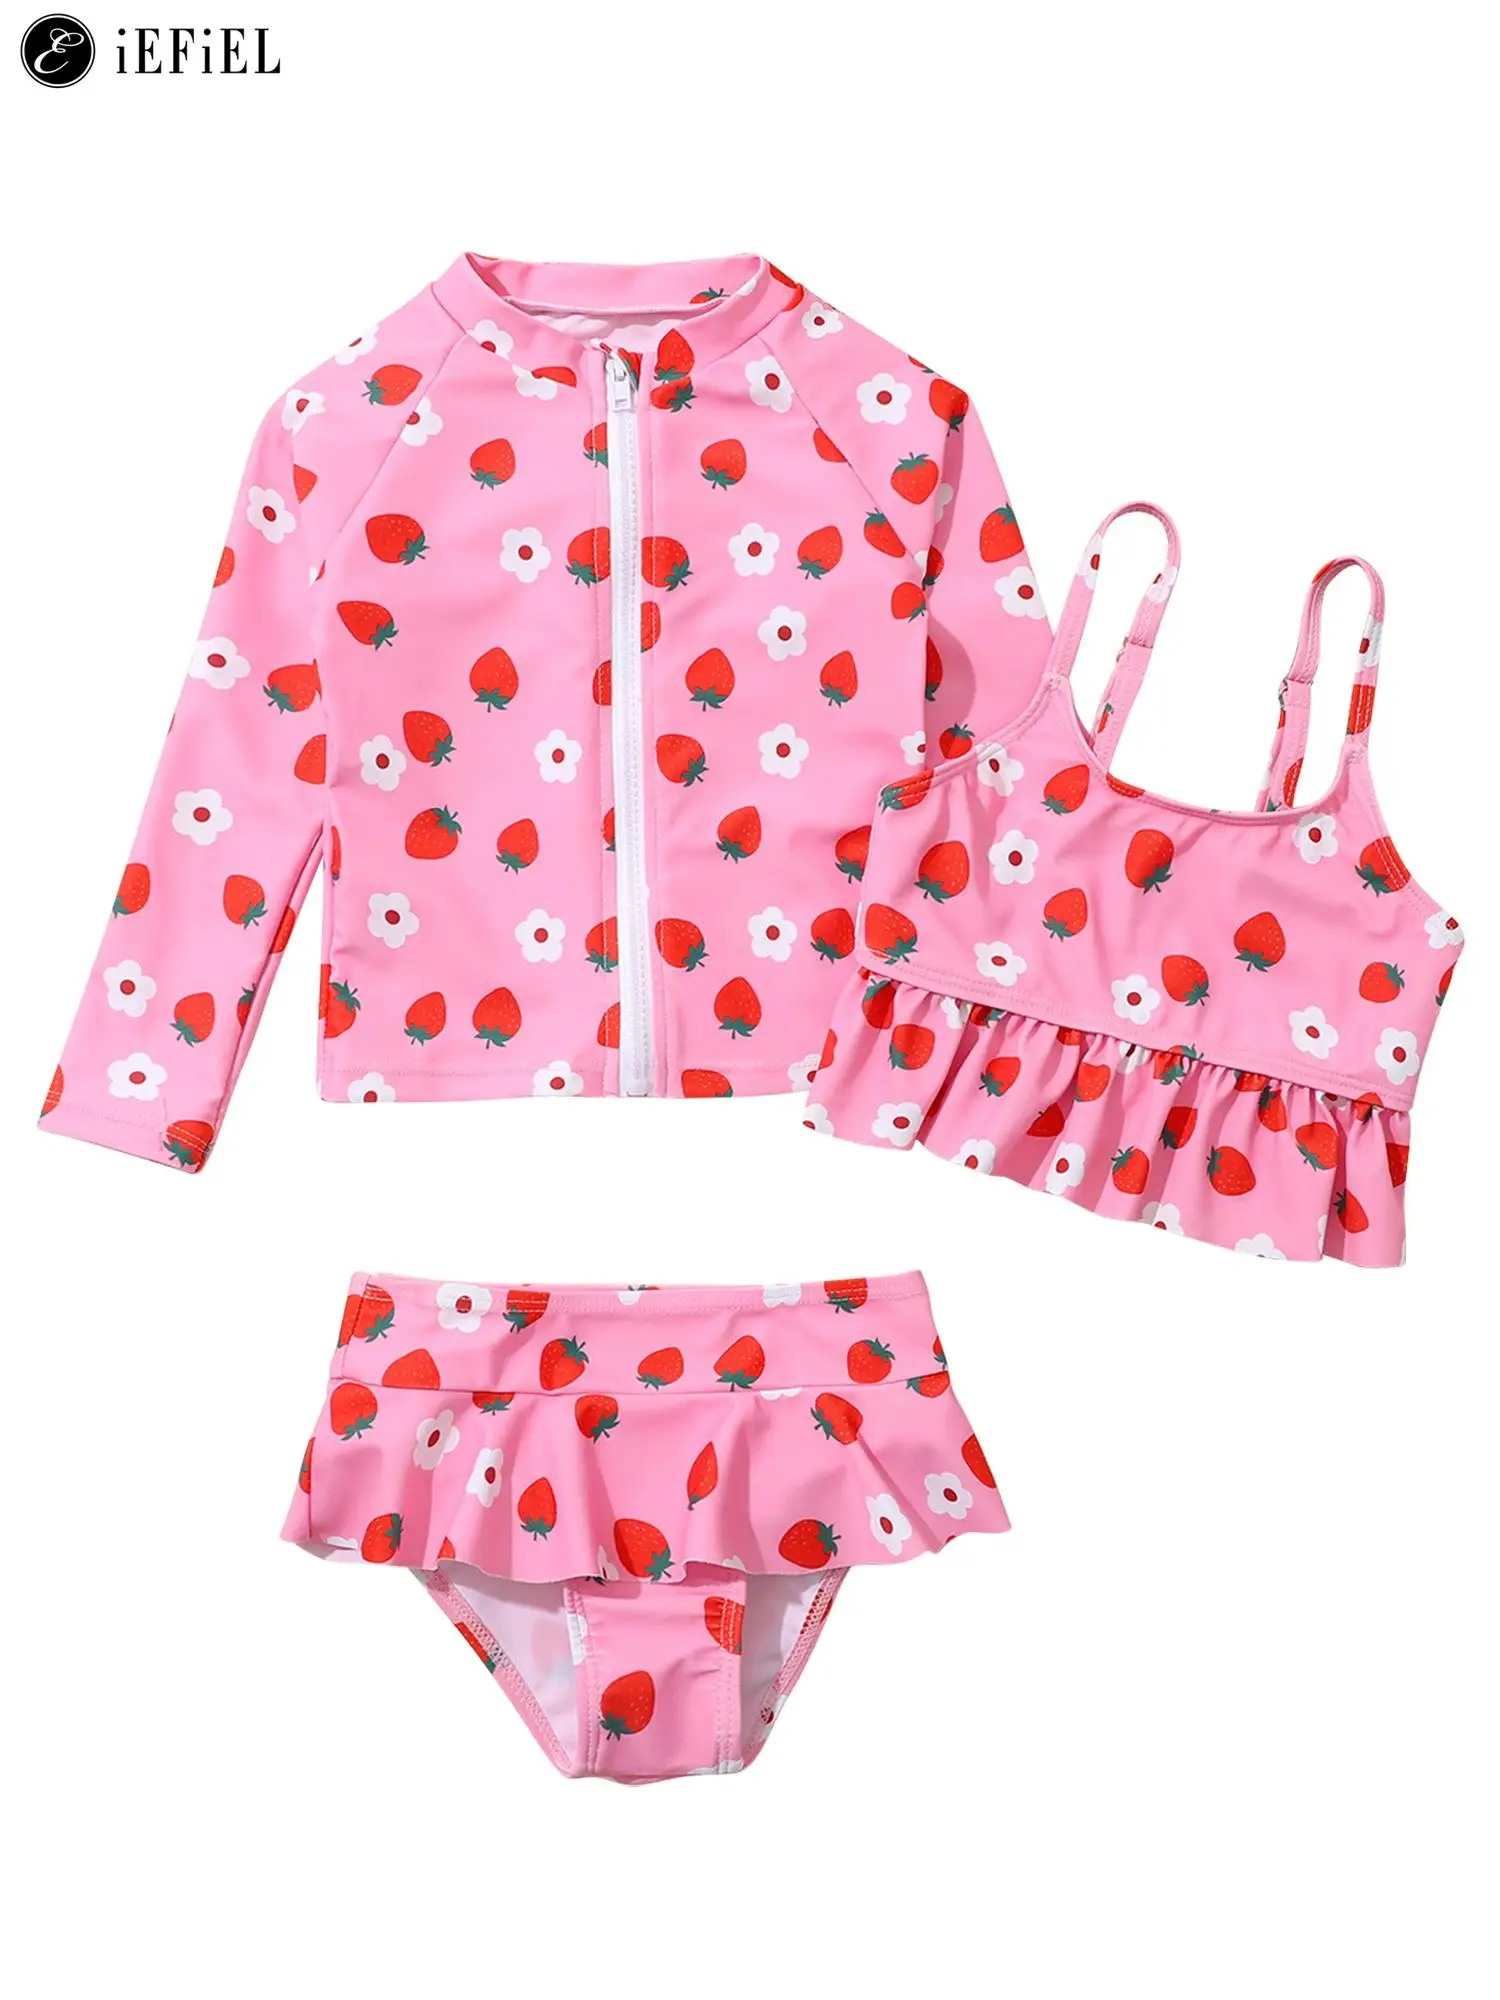 Kids Girls Strawberry Print Zipper Front Swimsuit Rash Guard with Briefs Bottoms 3 Pieces Swimwear Sunsuits Sun Protection